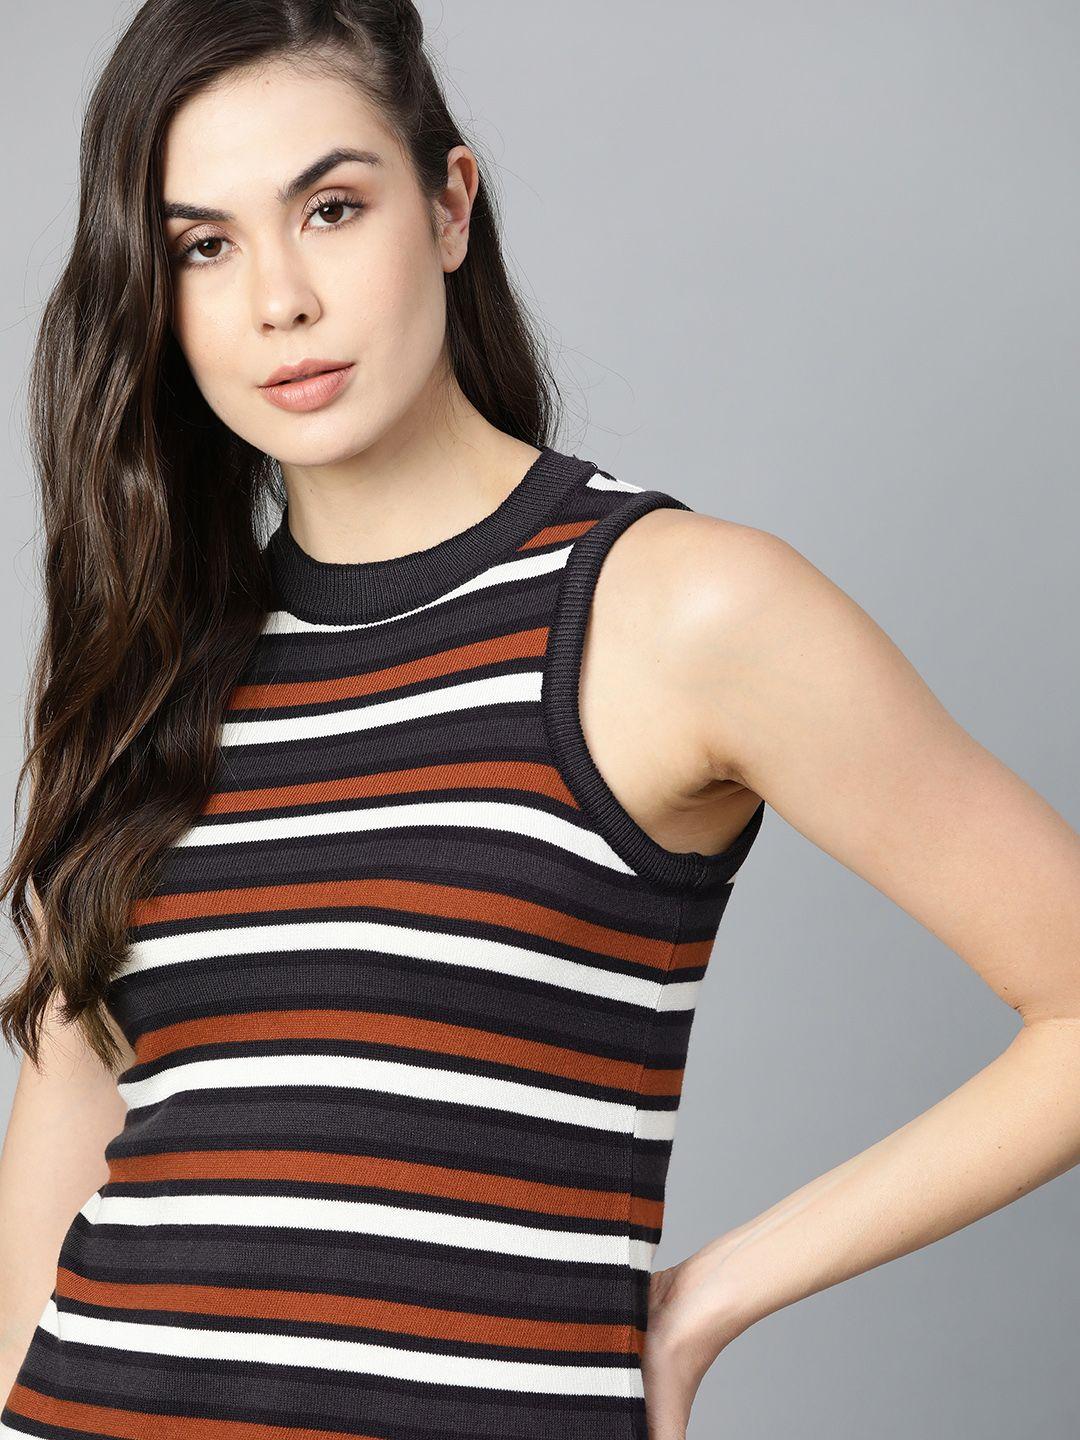 the roadster lifestyle co charcoal grey & white striped flat knit tank top